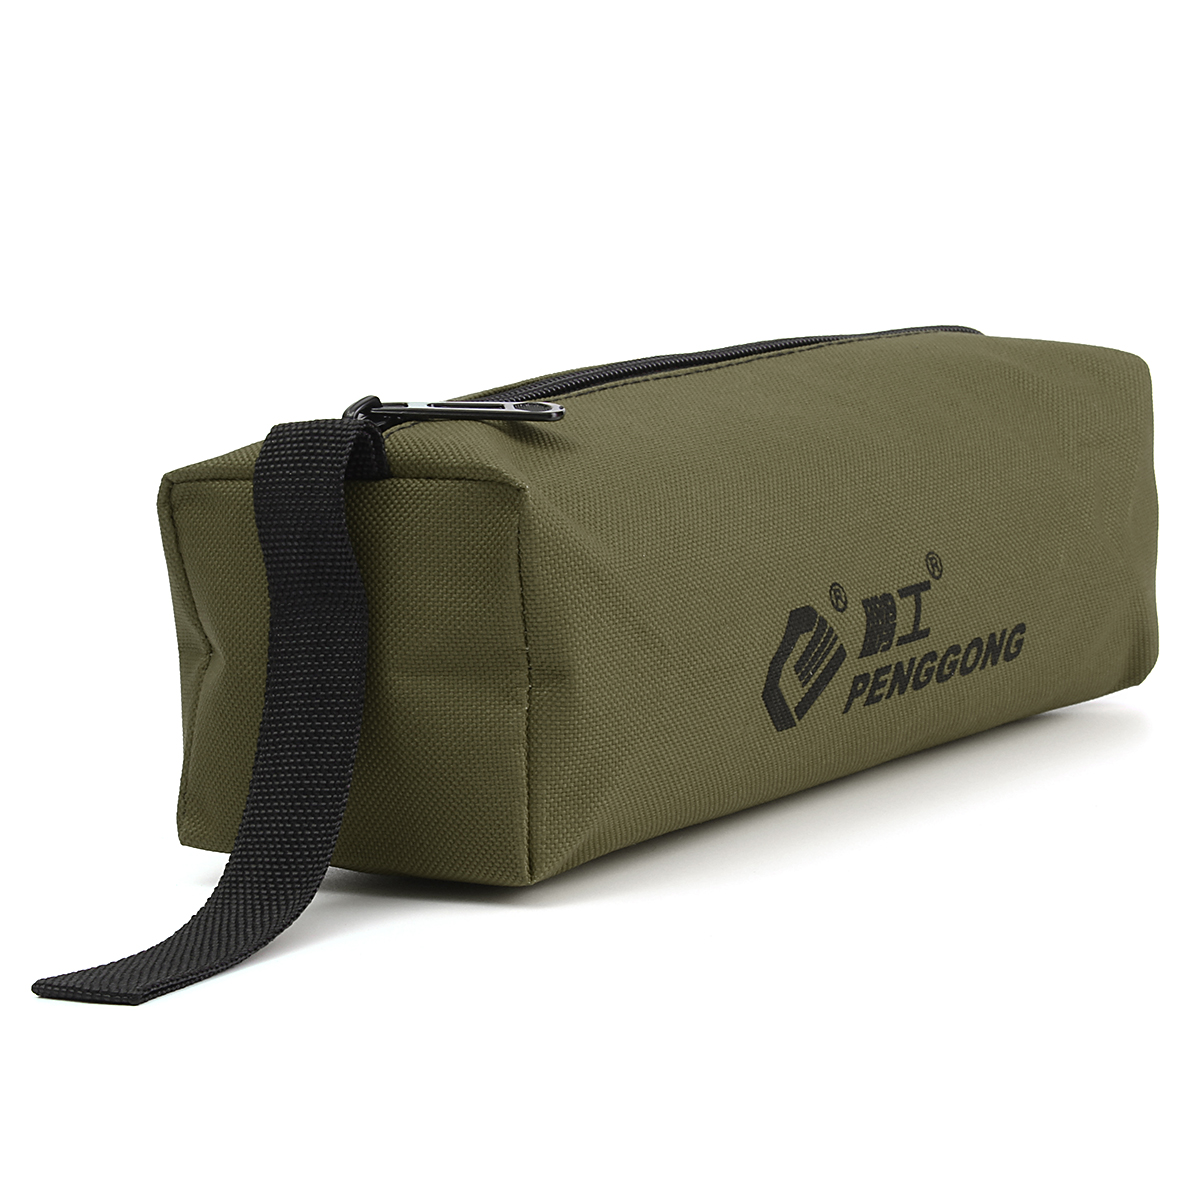 Multifunctional-Storage-Tools-Bag-Utility-Bag-Oxford-Canvas-for-Small-Metal-Parts-1120172-9